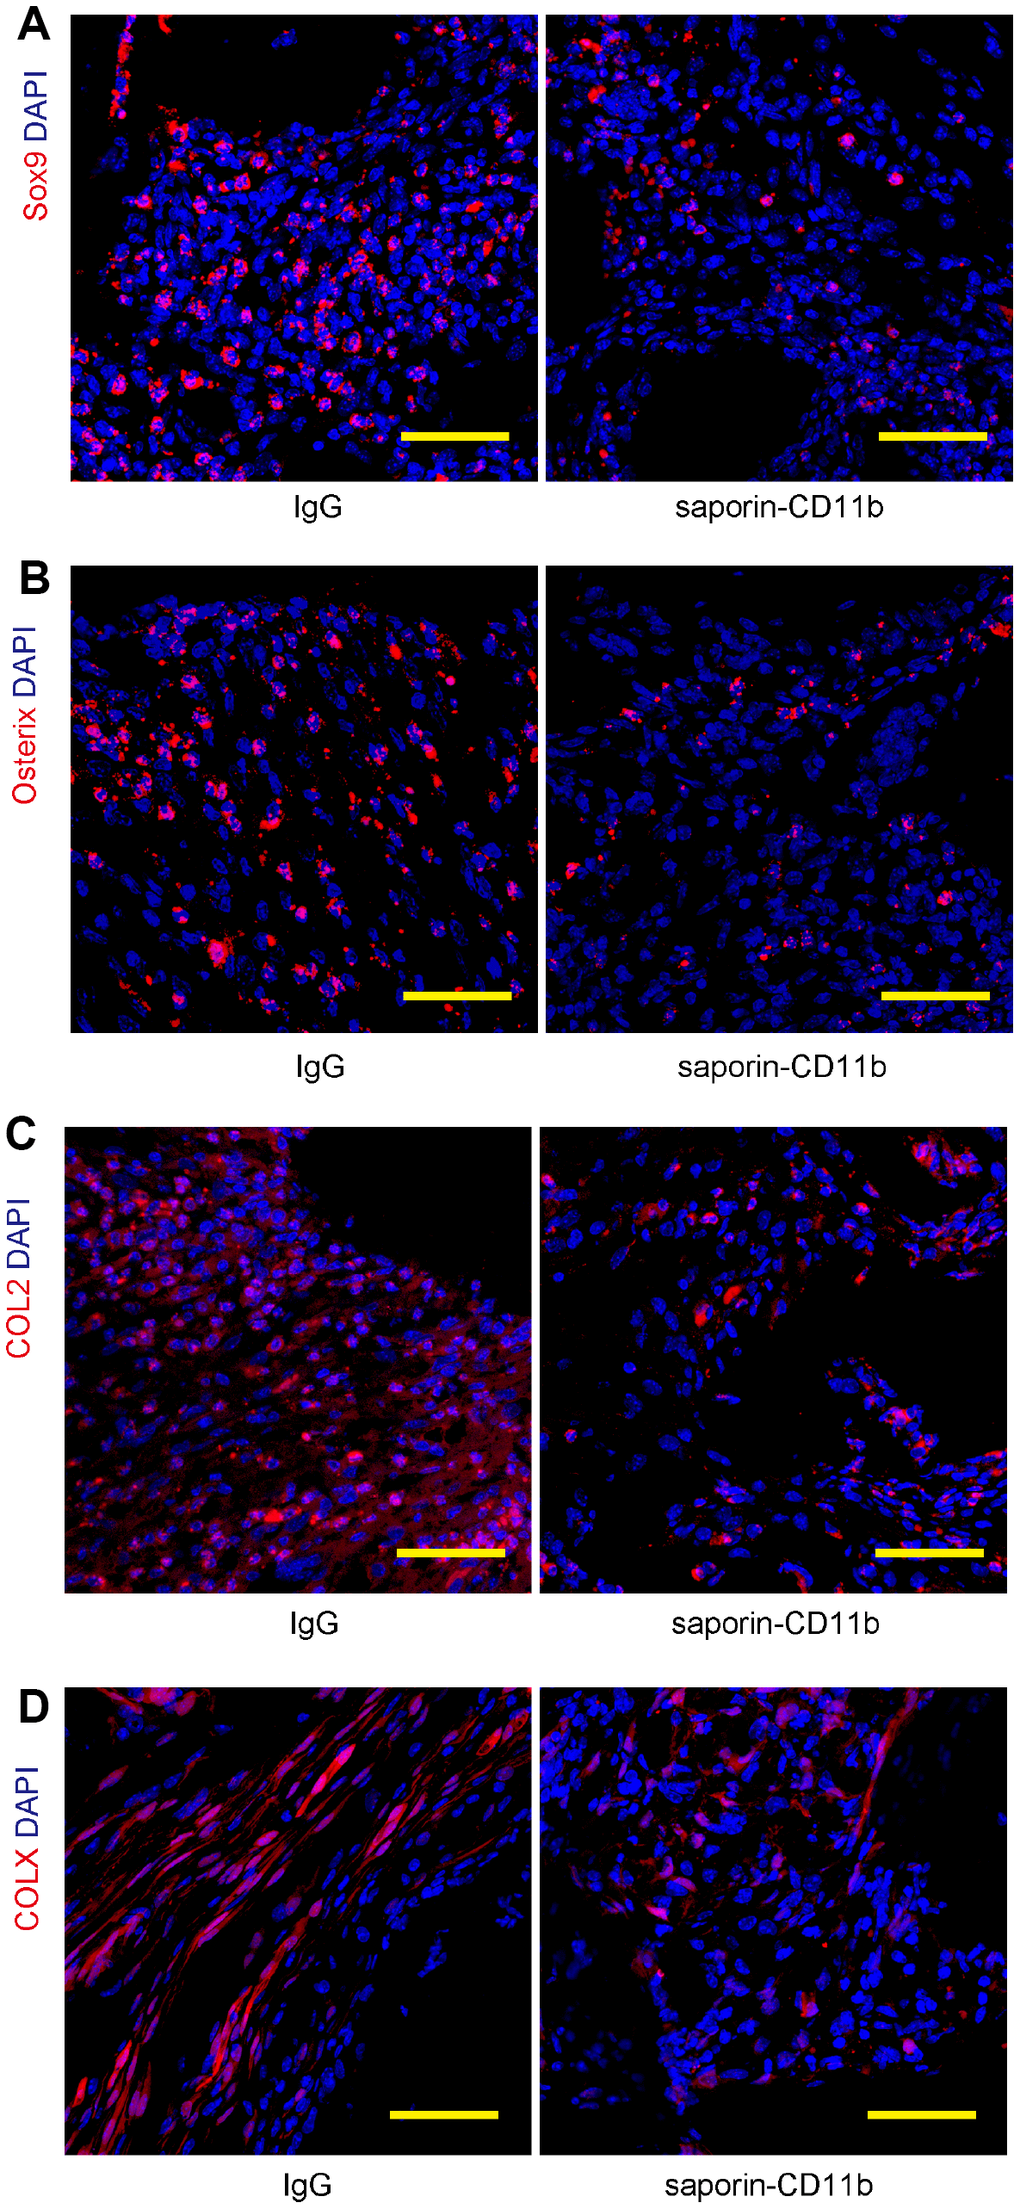 Macrophage depletion decreases regeneration-associated proteins. (A–D) Regeneration of the bone was assessed by examination of 4 regenerative markers, Sox9 (A) Osterix (B), COL2 (C) and COL X (D), by immunohistochemistry. N=8. Scale bars are 50μM.